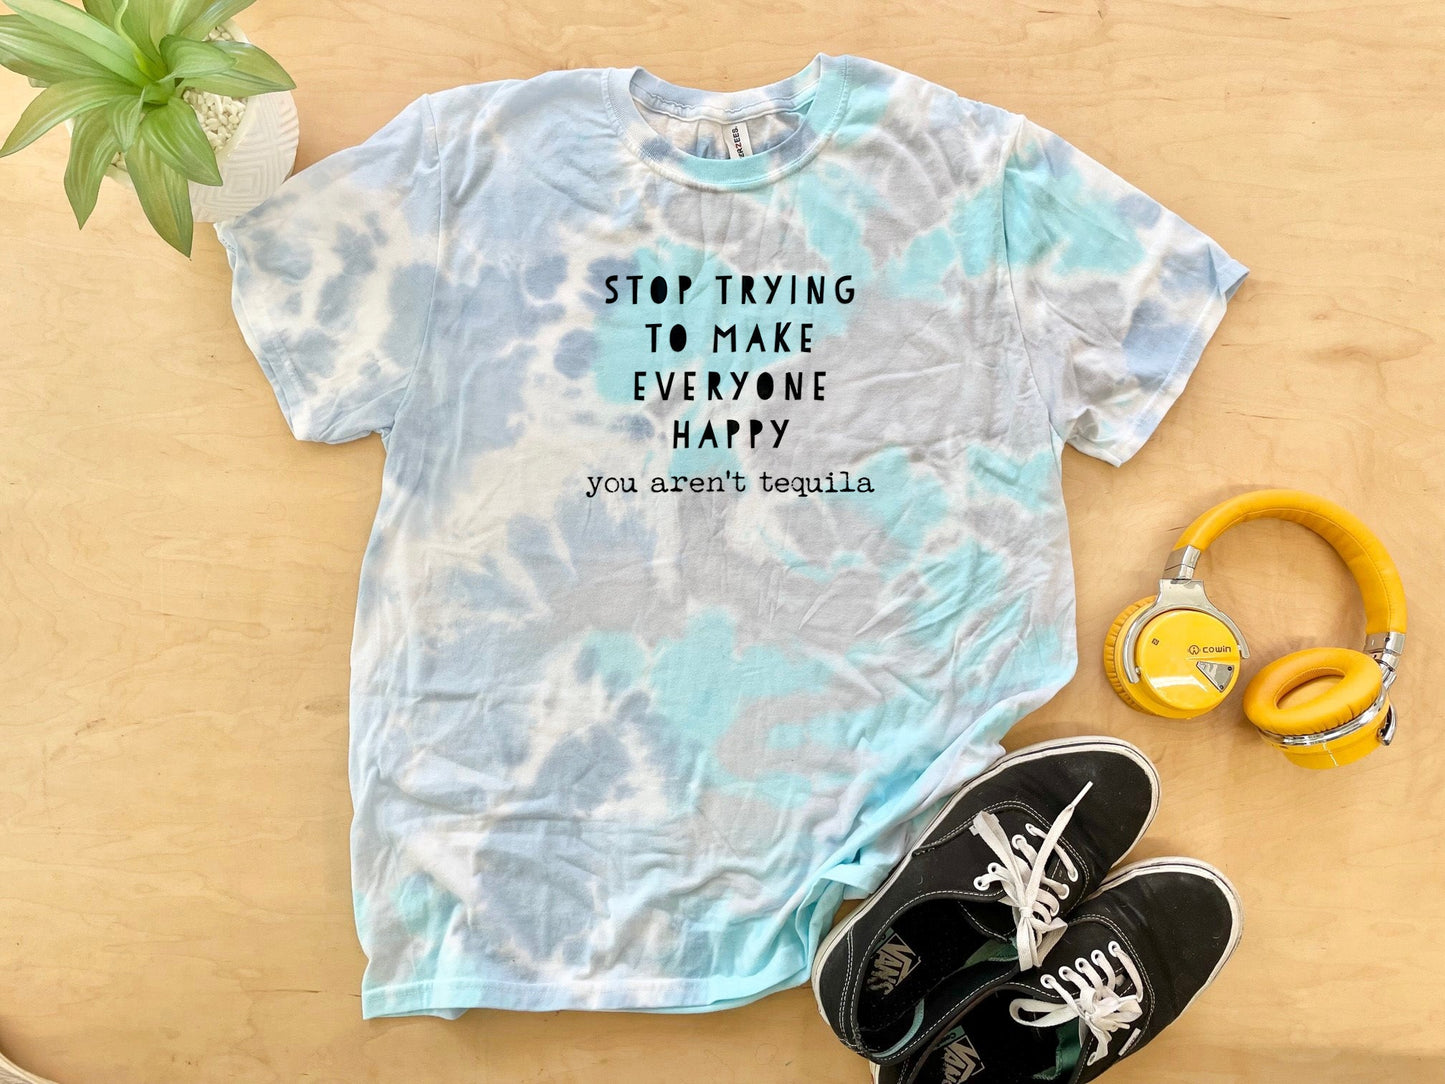 Stop Trying To Make Everyone Happy... You Aren't Tequila - Mens/Unisex Tie Dye Tee - Blue